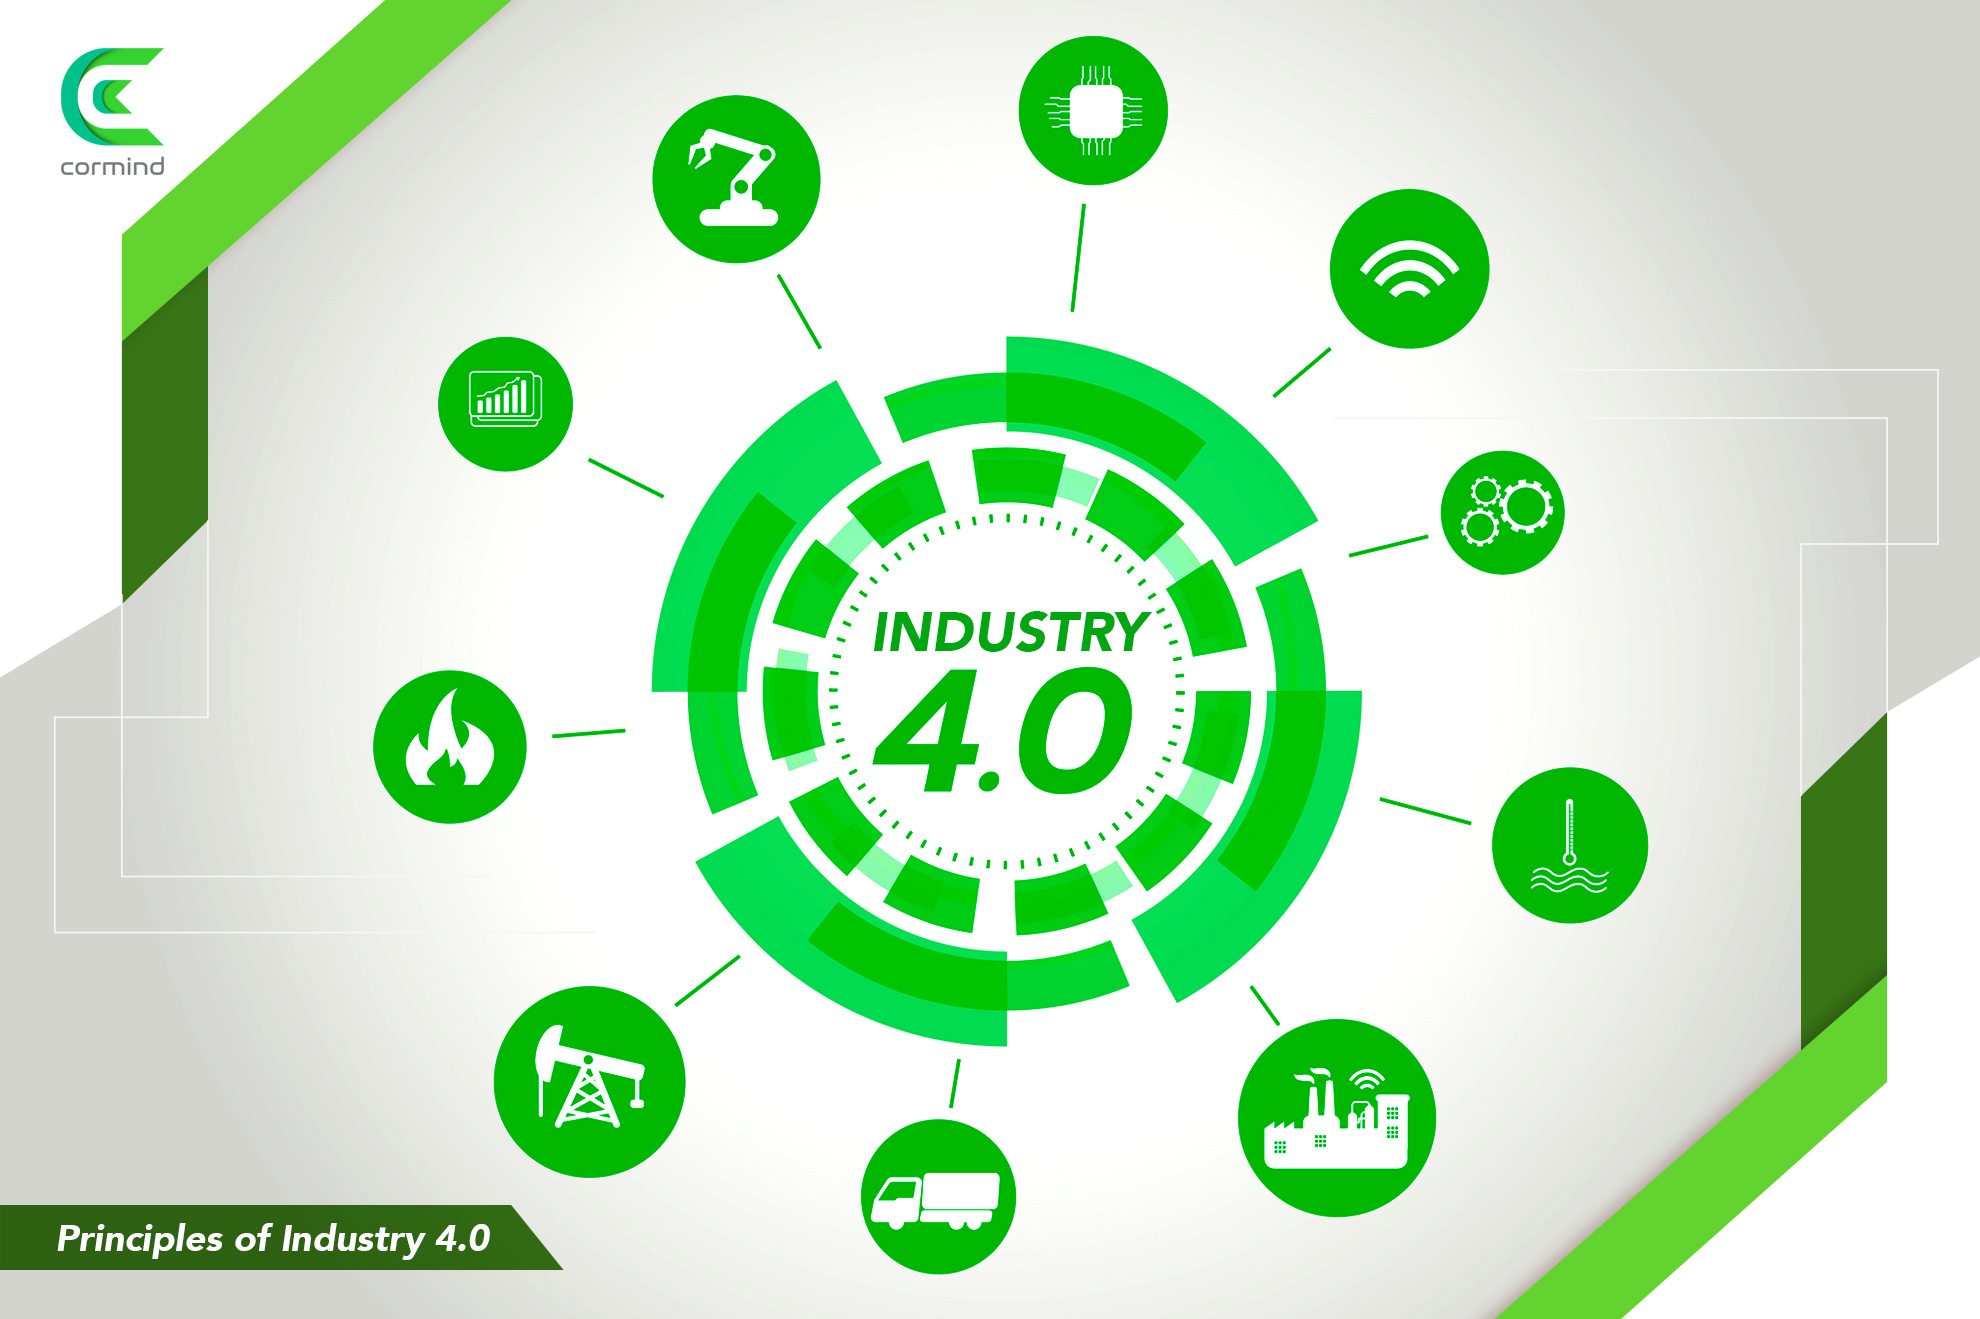 Principles of Industry 4.0